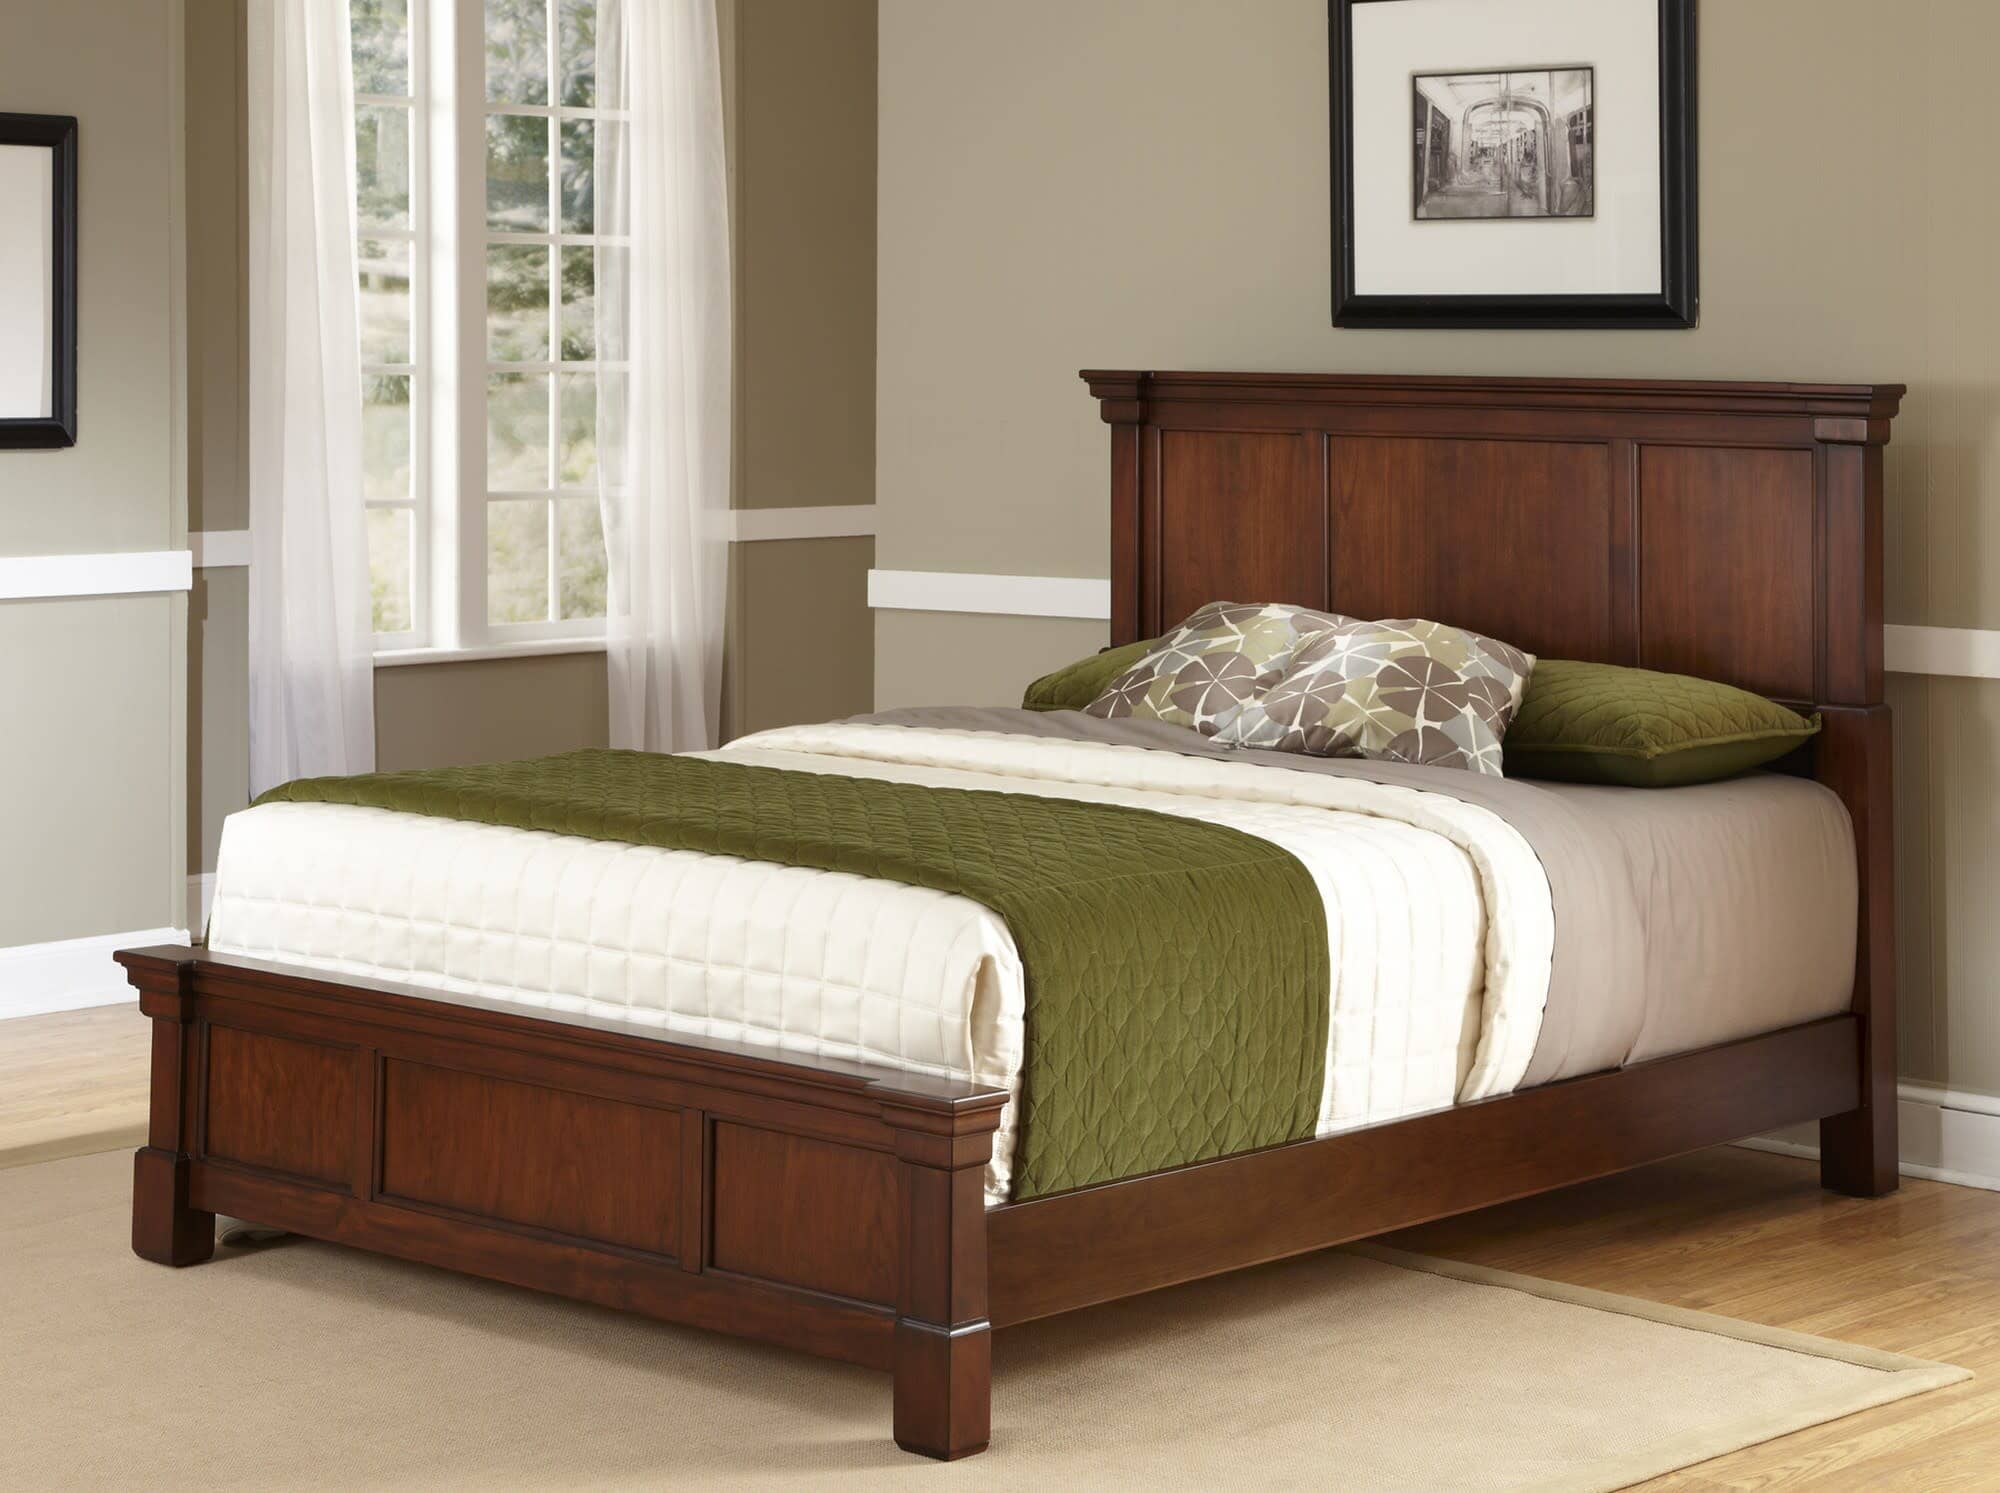 Traditional King Bed By Aspen King Bed Aspen